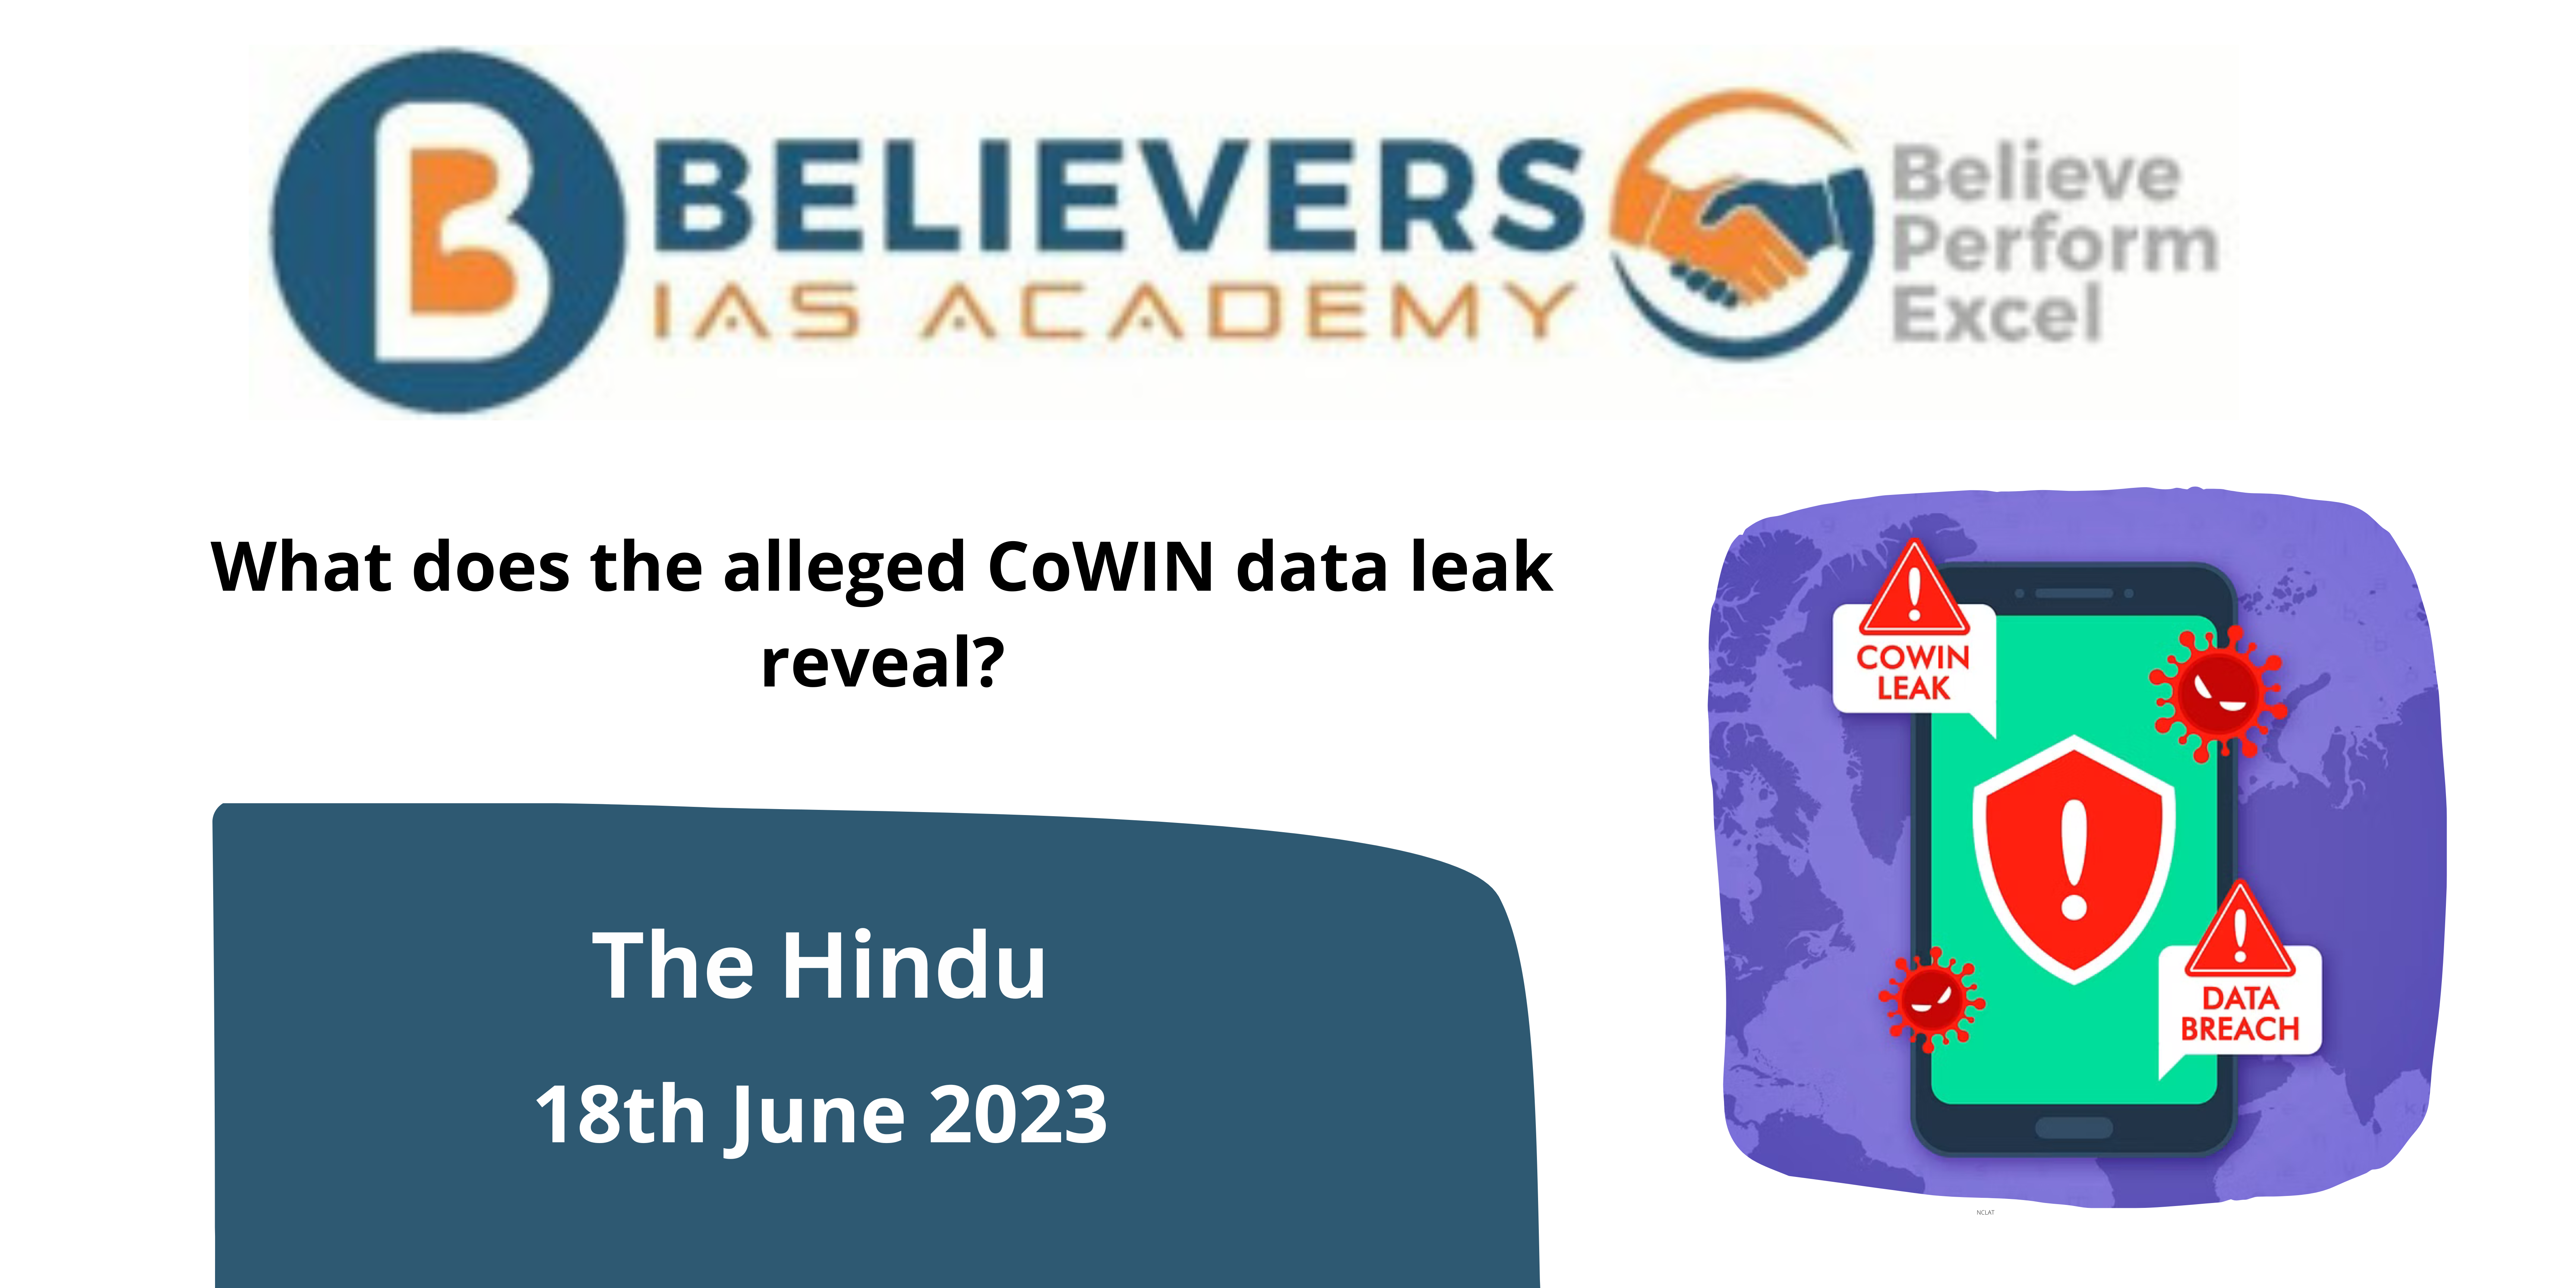 What does the alleged CoWIN data leak reveal?